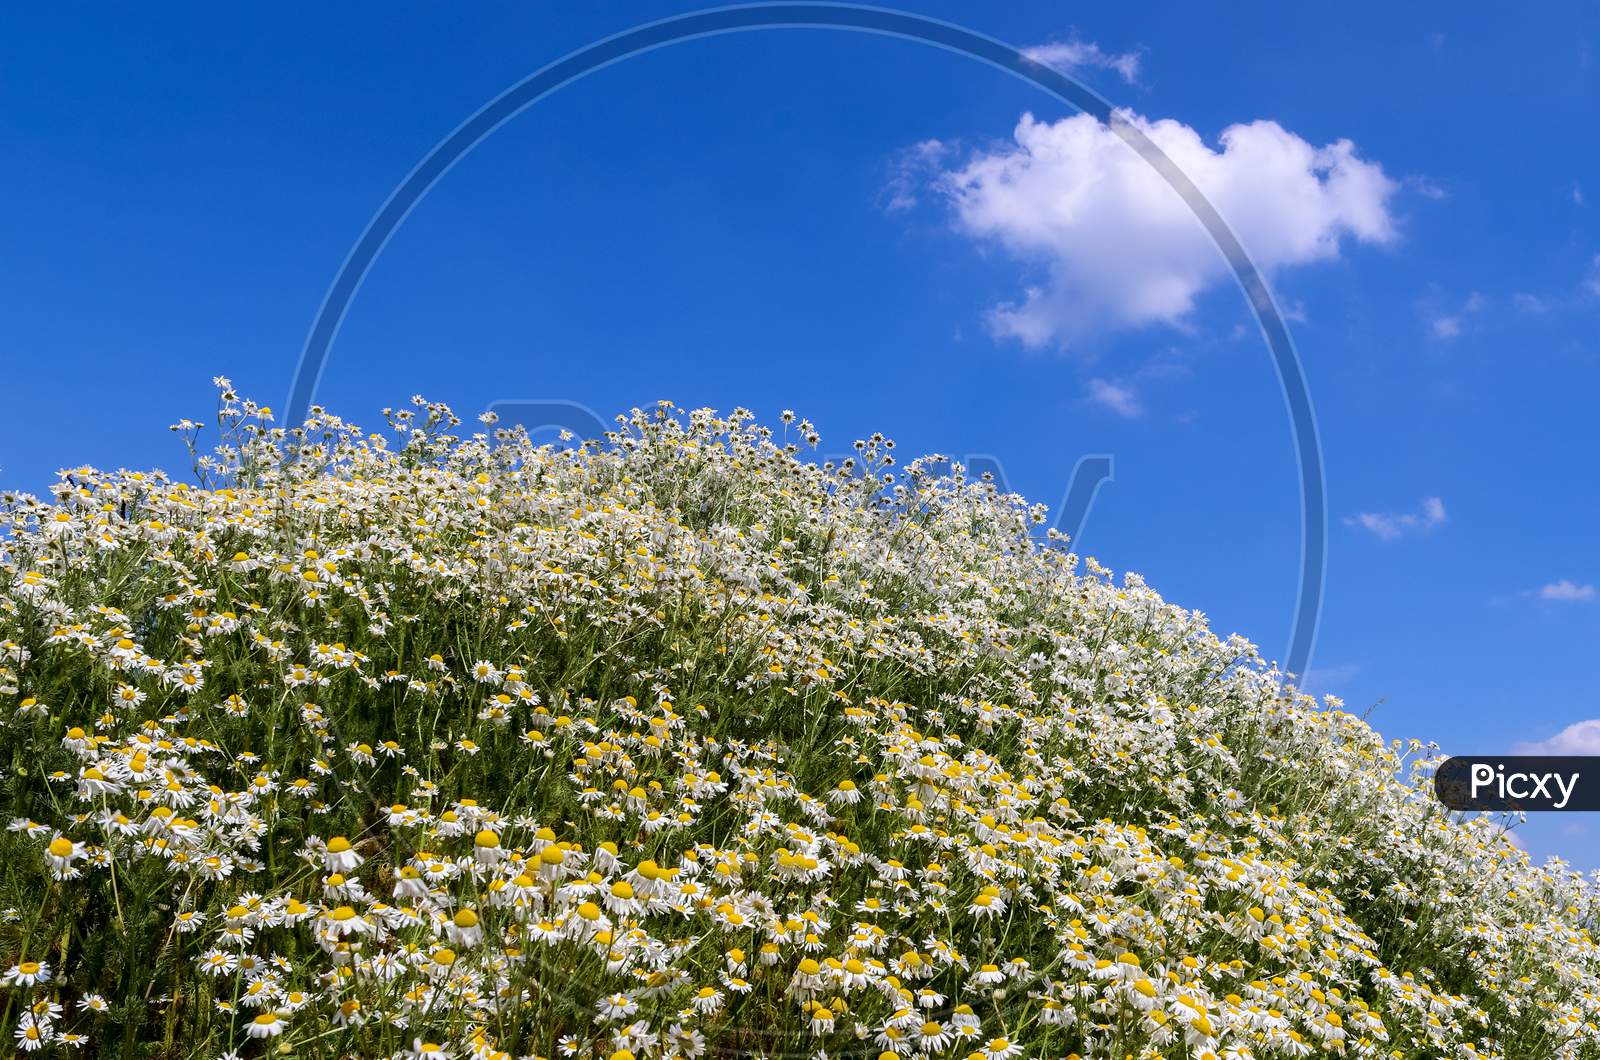 White garden daisy in a floral summer background. Leucanthemum vulgare. Flowering chamomile and gardening concept in a beautiful nature scene with blooming daisies